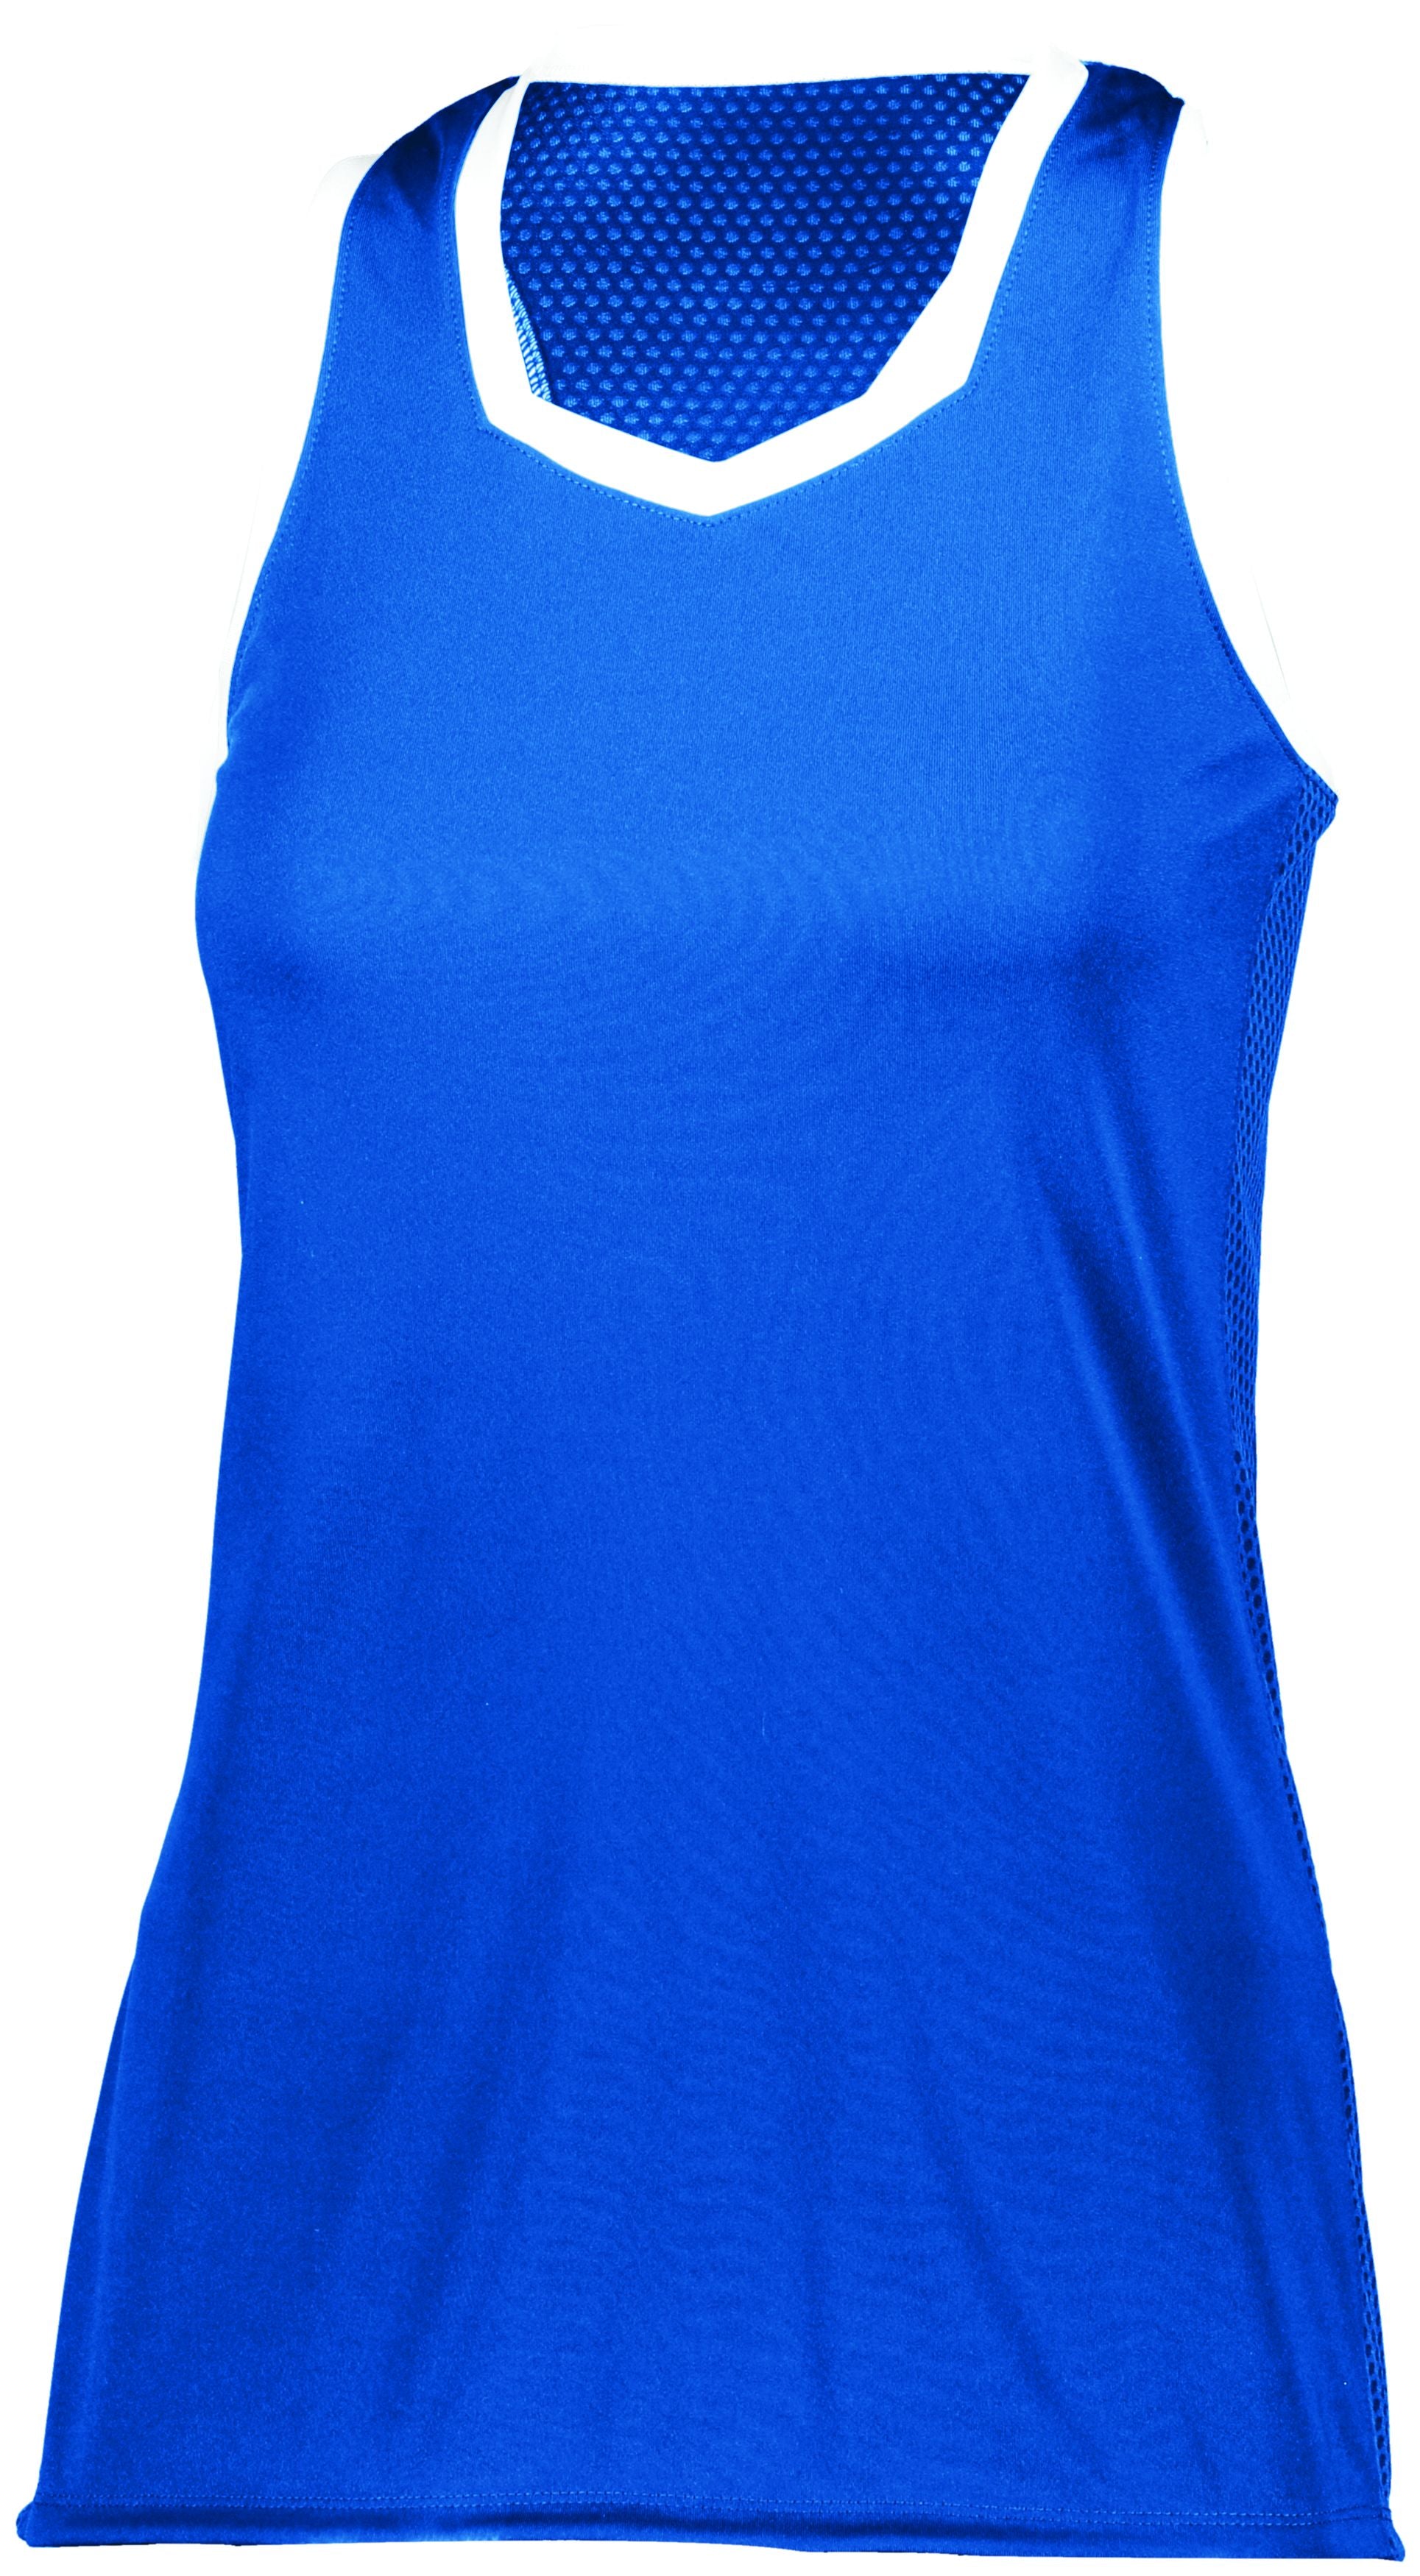 Augusta Sportswear Ladies Crosse Jersey in Royal/White  -Part of the Ladies, Ladies-Jersey, Augusta-Products, Shirts product lines at KanaleyCreations.com